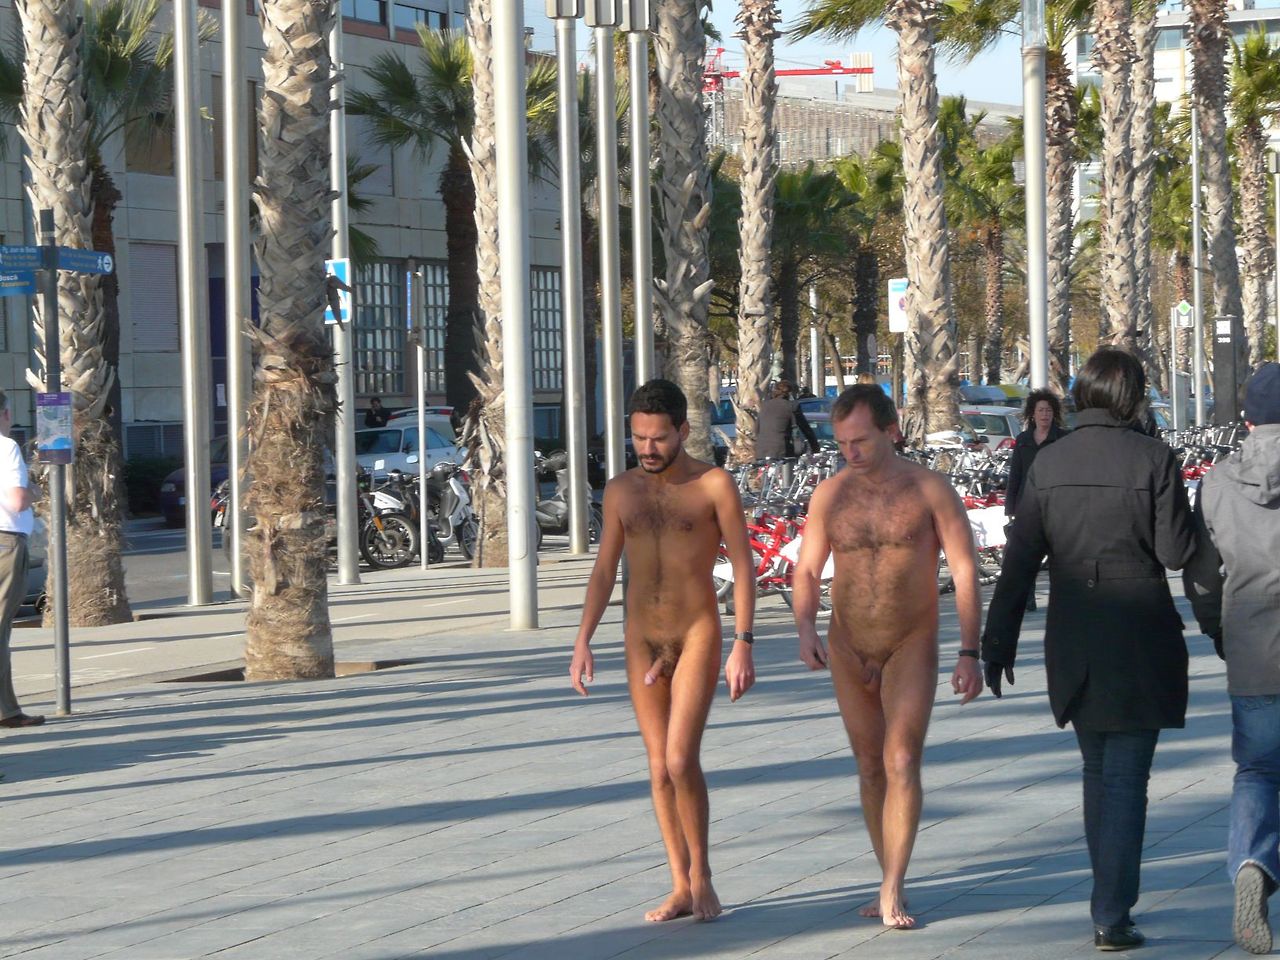 Nude beneath the palm-lined streets of Barcelona.